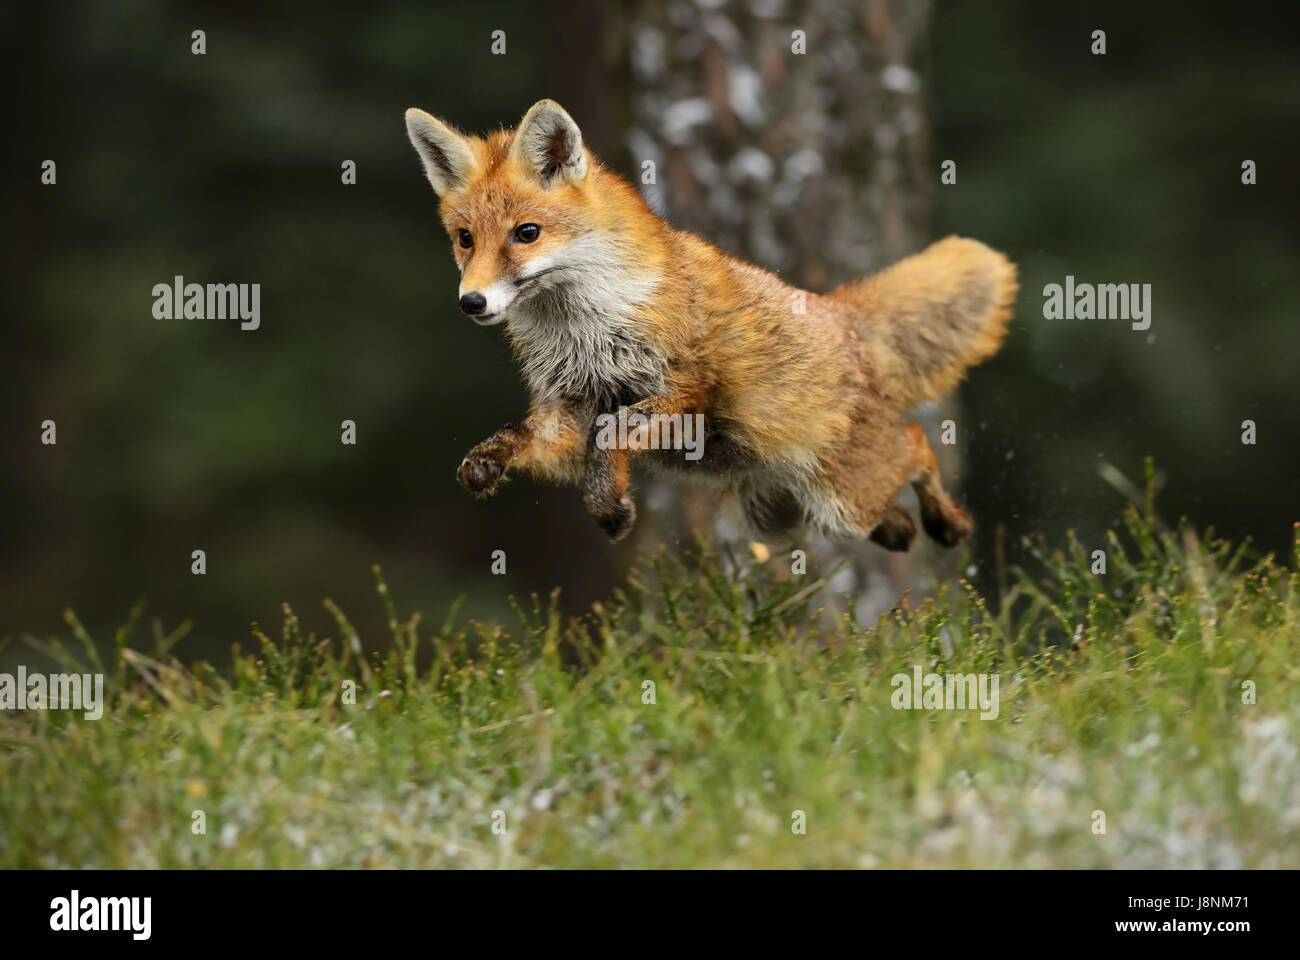 Red Fox running and skipping in forest Stock Photo